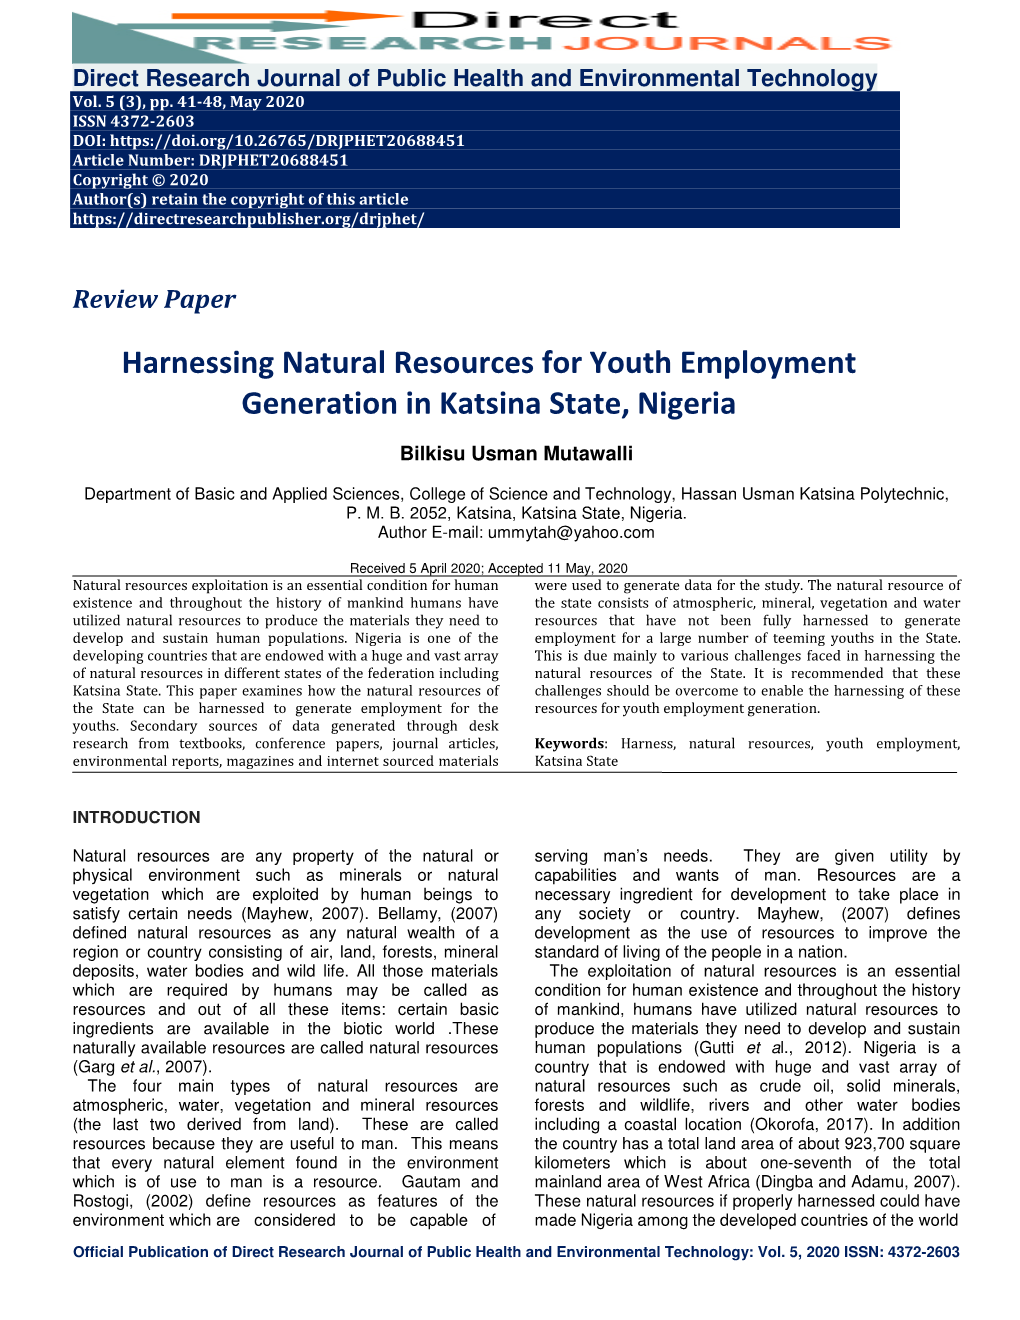 Harnessing Natural Resources for Youth Employment Generation in Katsina State, Nigeria